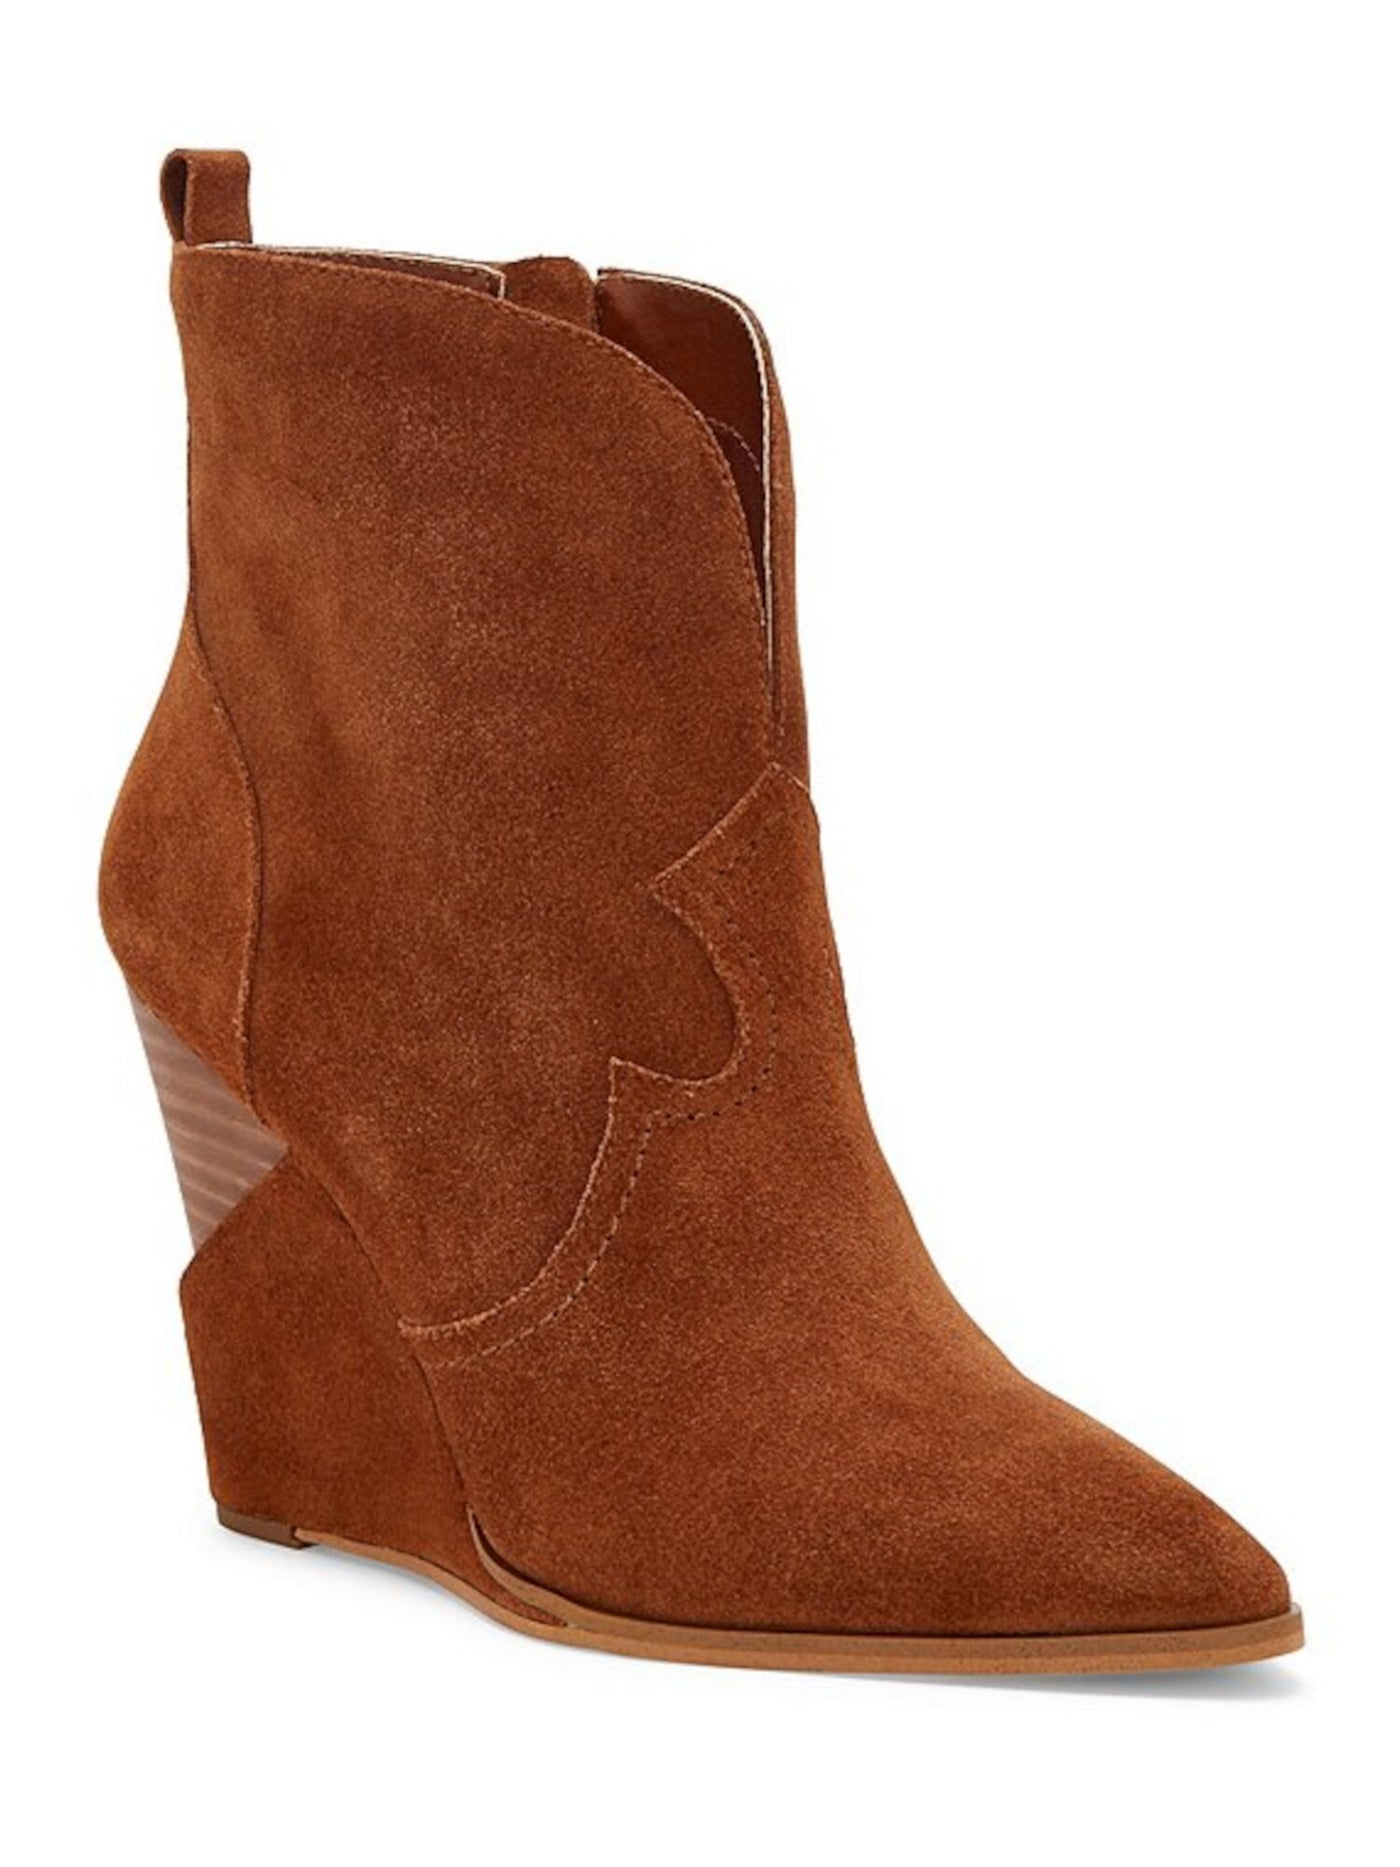 JESSICA SIMPSON Womens Brown Deep V Notch Pull Tab Comfort Hilrie Pointed Toe Wedge Zip-Up Leather Booties 7.5 M